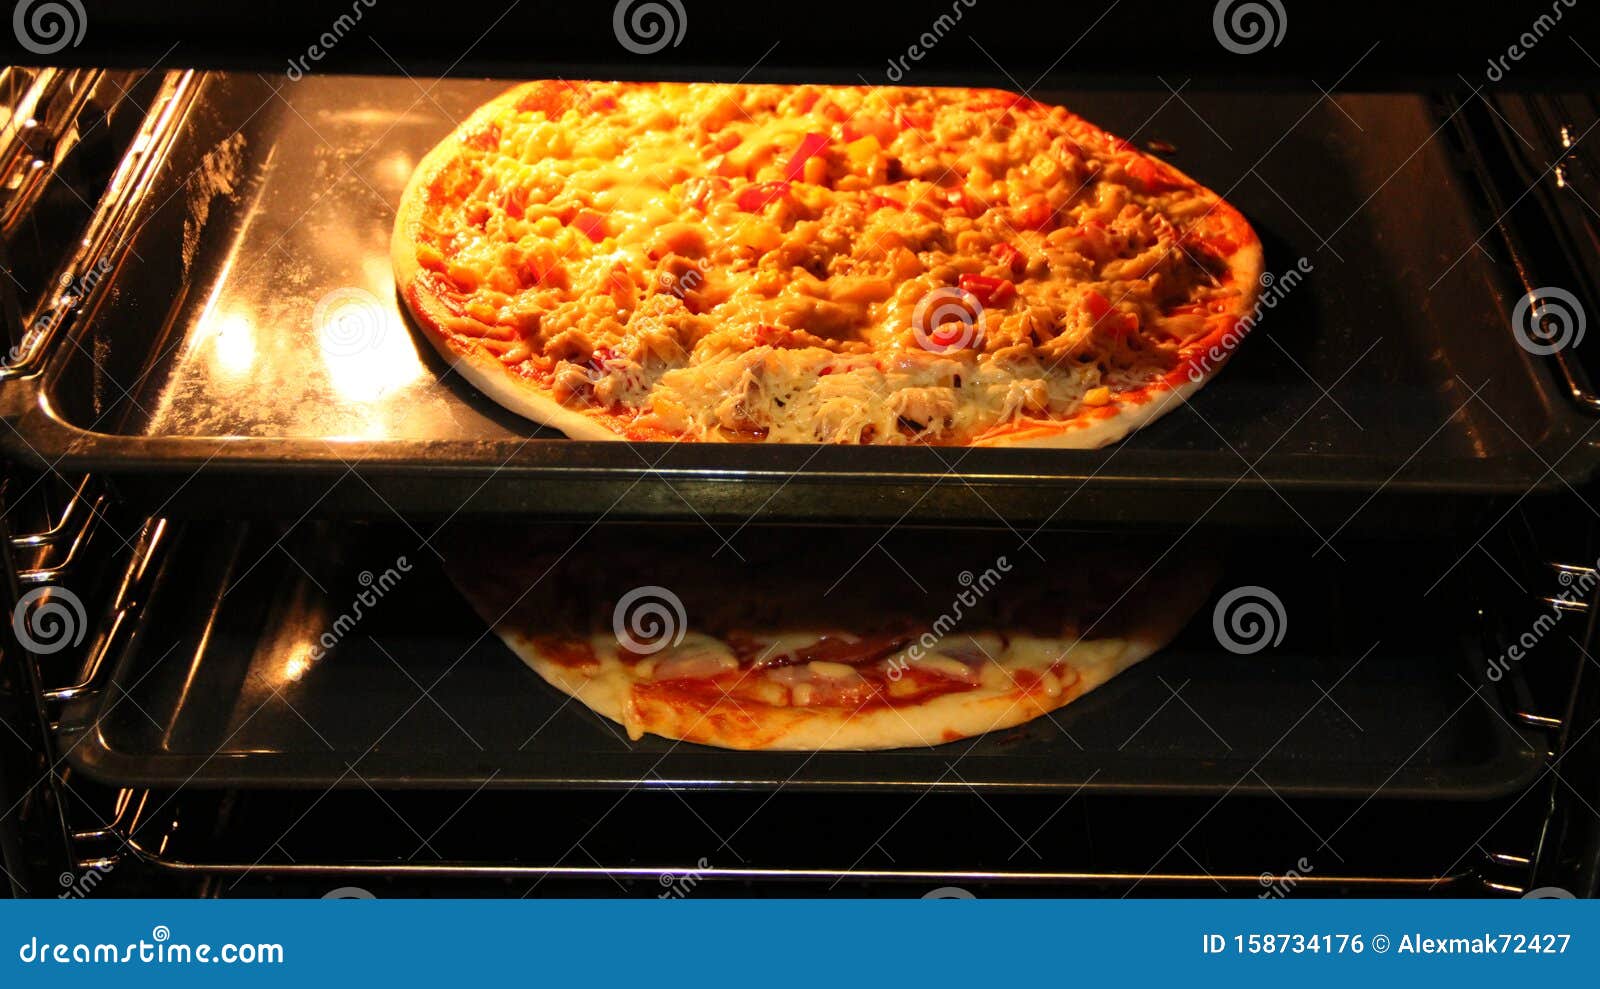 Cook Preparing Delicious Pizza In Oven. Cooking Fast Food In